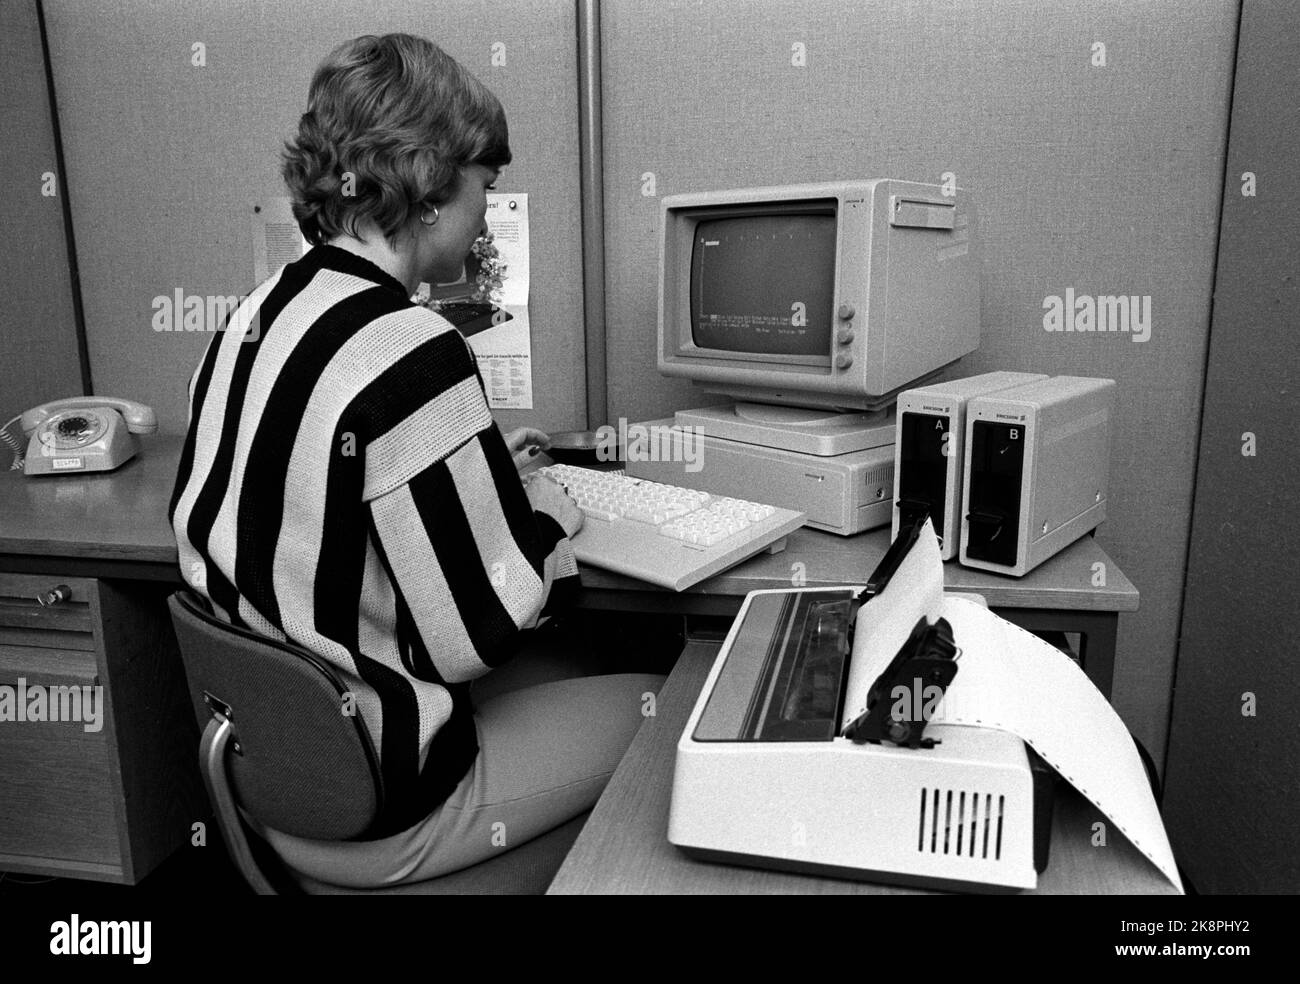 Oslo 19830520 Woman in work by computer in office. Computer, floppy disk drive, printer and gray phone in the picture. Photo: NTB / NTB Stock Photo